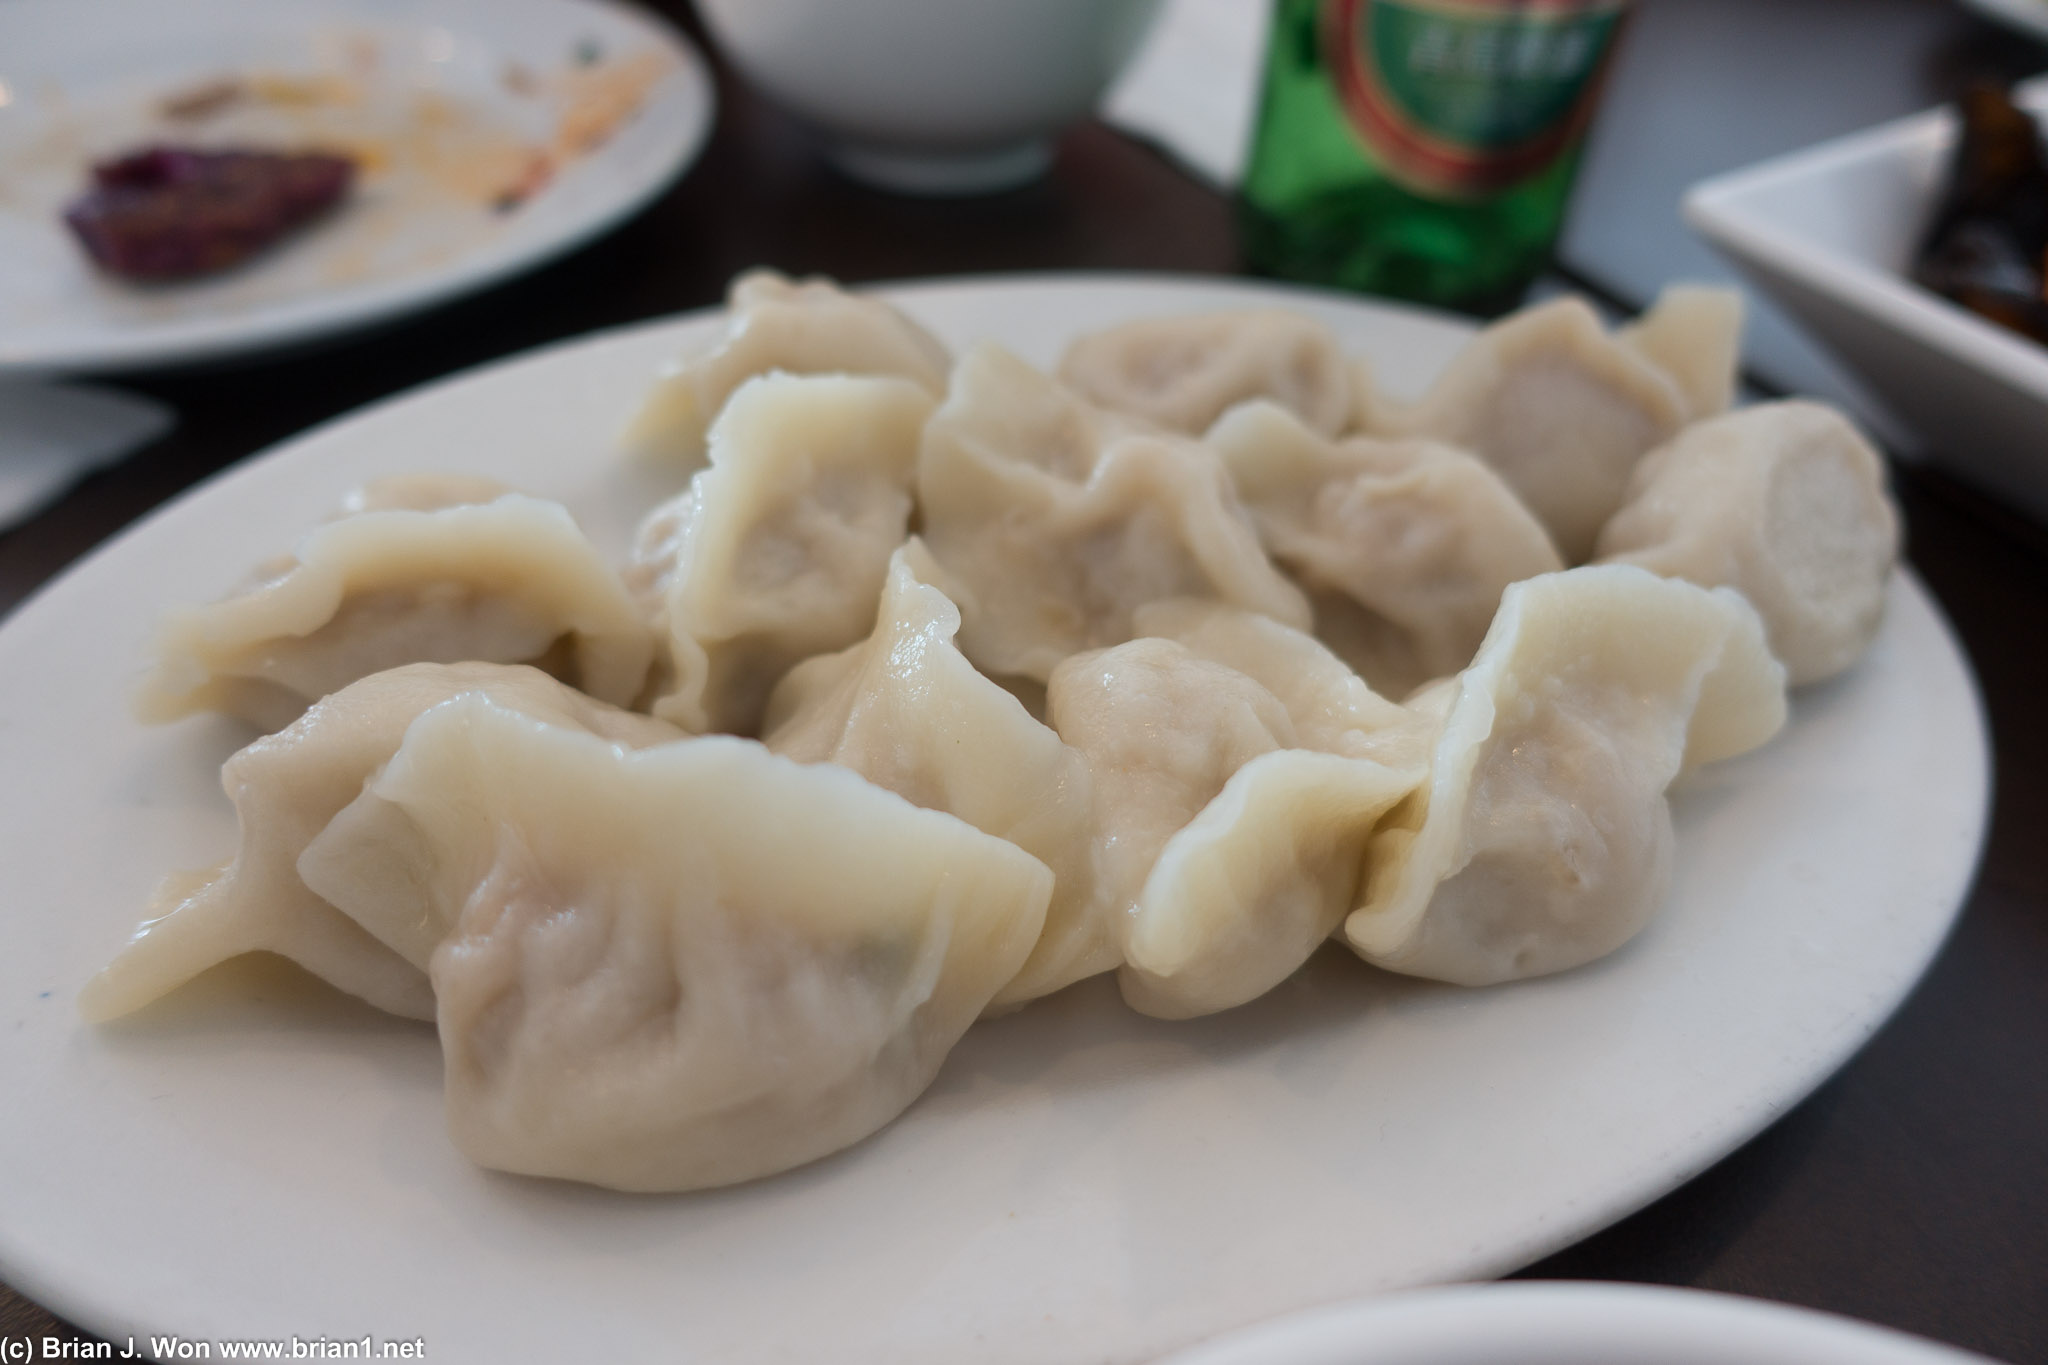 Dumplings. Skins a bit thicker but not bad at all.